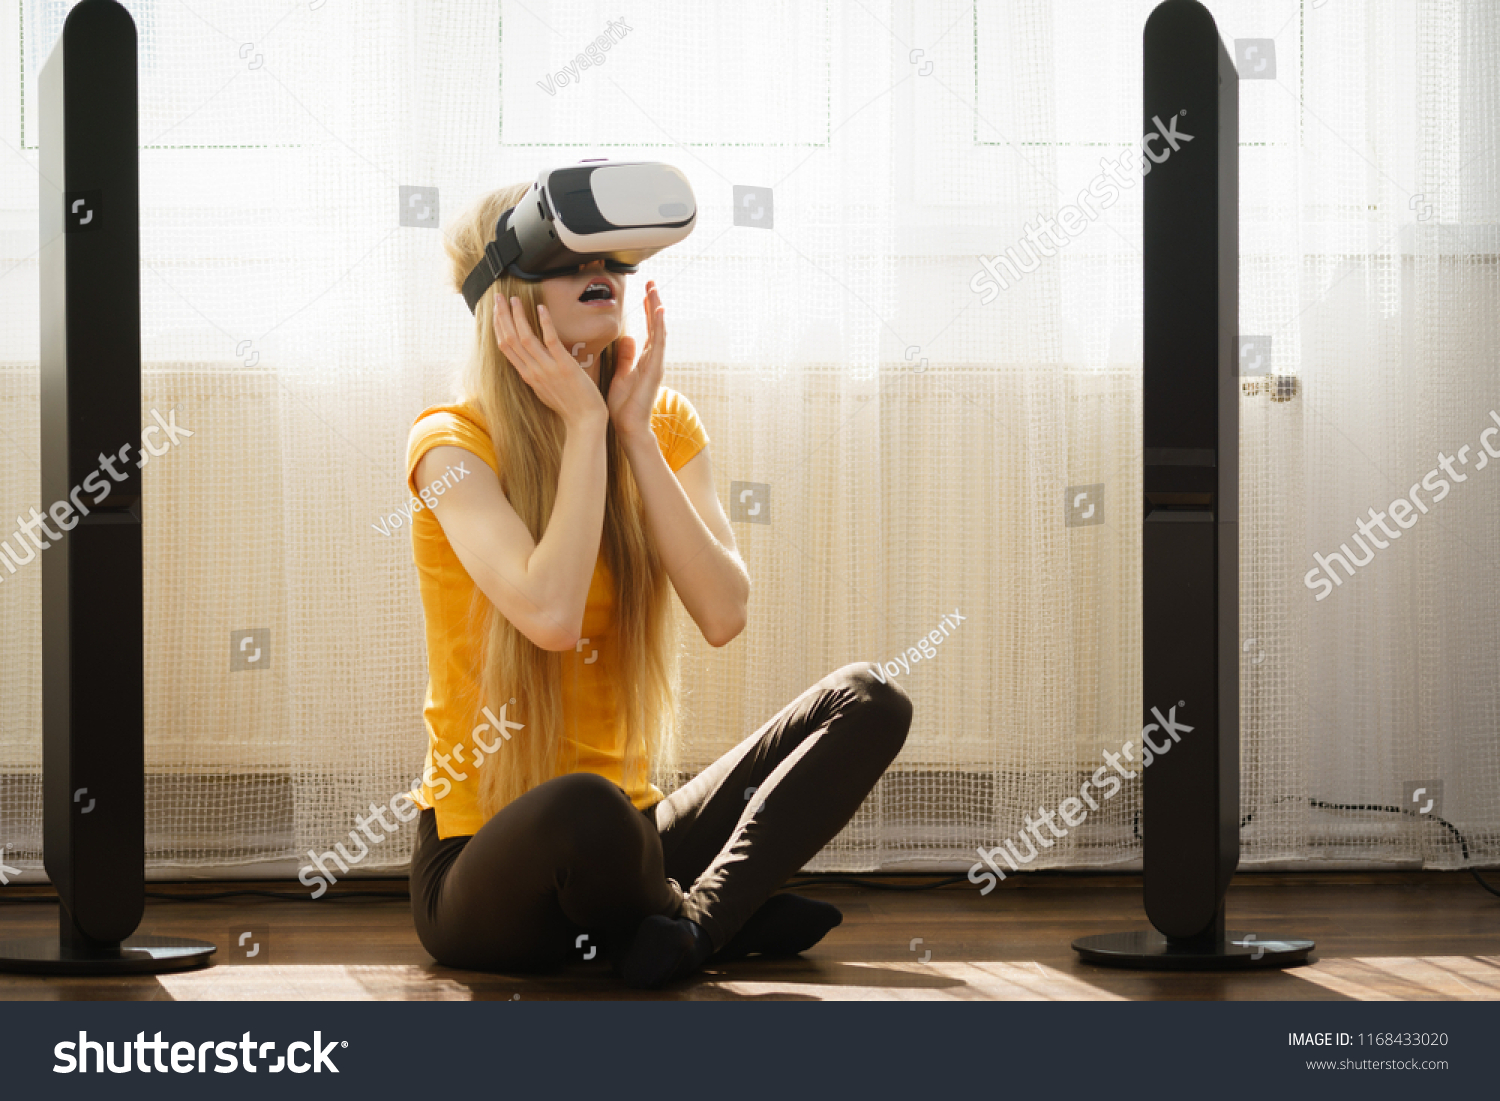 Young woman wearing virtual reality goggles vr 3d box sitting on floor in living room, listening to music. Connection, technology, new generation and progress concept. #1168433020